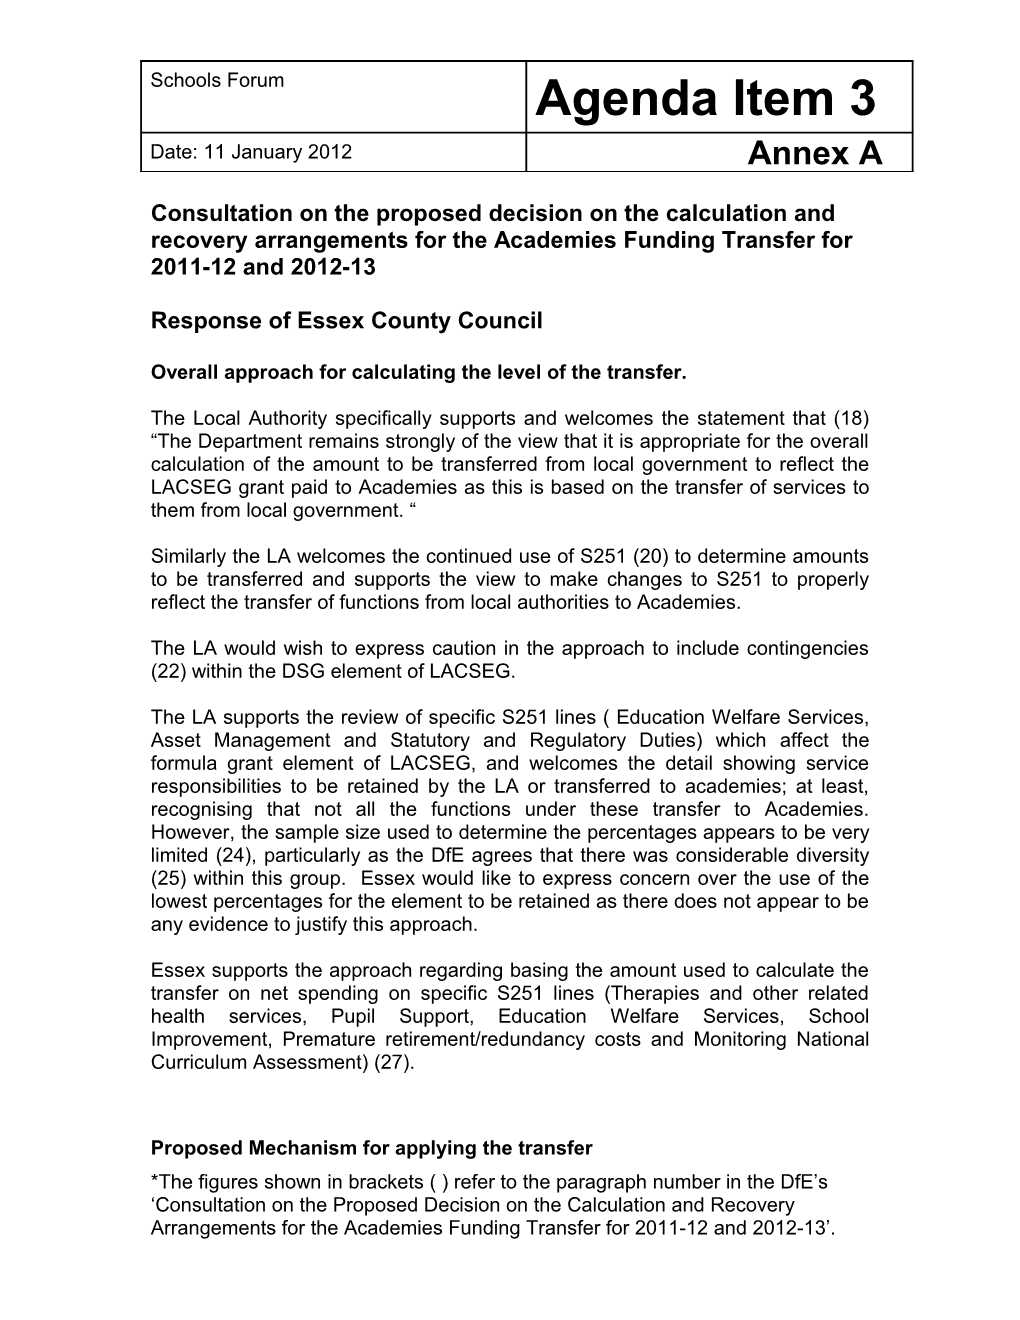 Consultation on the Proposed Decision on the Calculation and Recovery Arrangements For